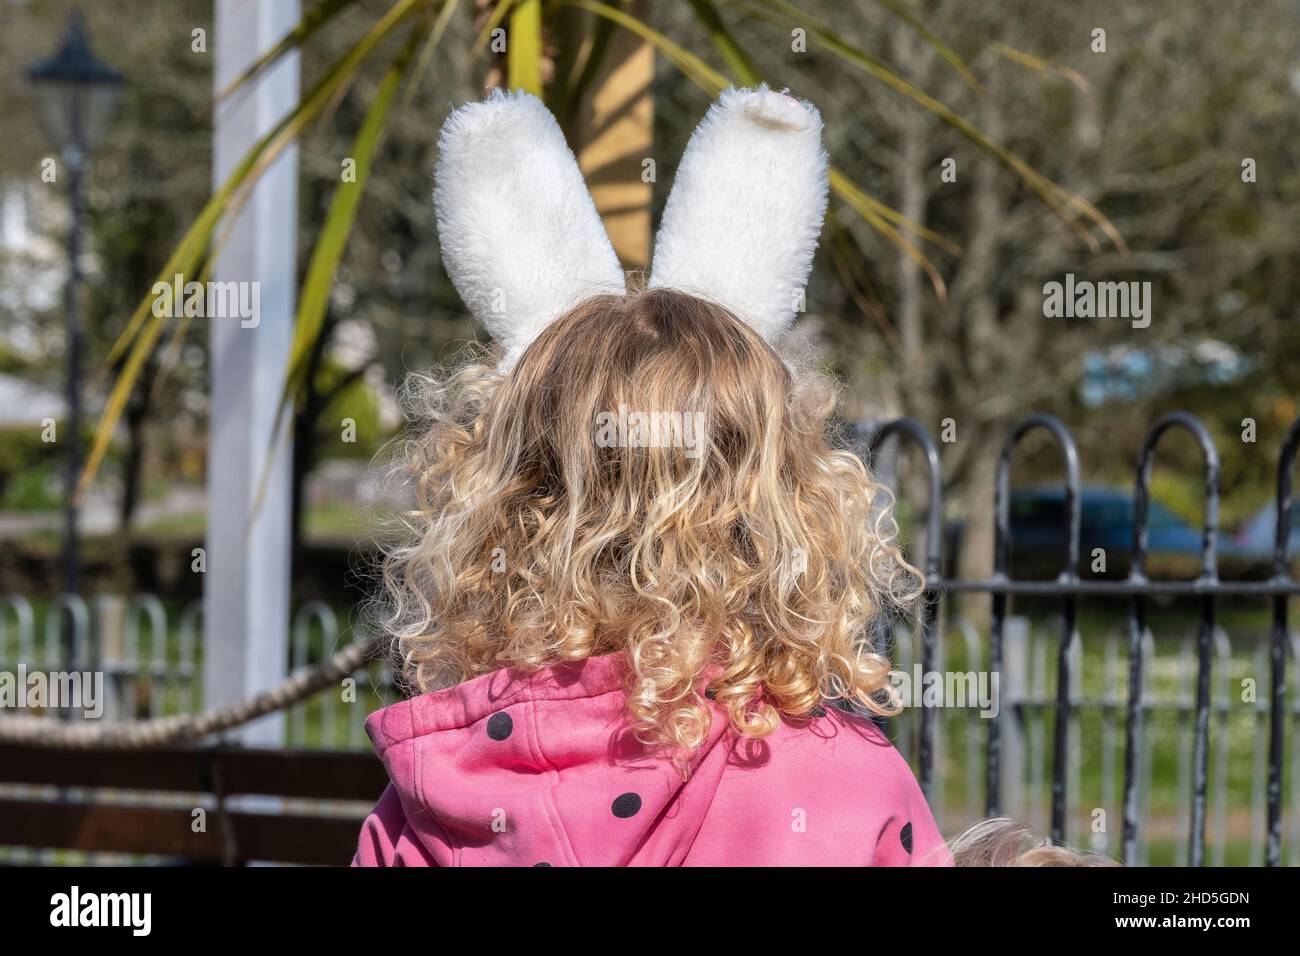 Rear view of a young girl with curly blonde hair wearing fluffy rabbit ears. Stock Photo